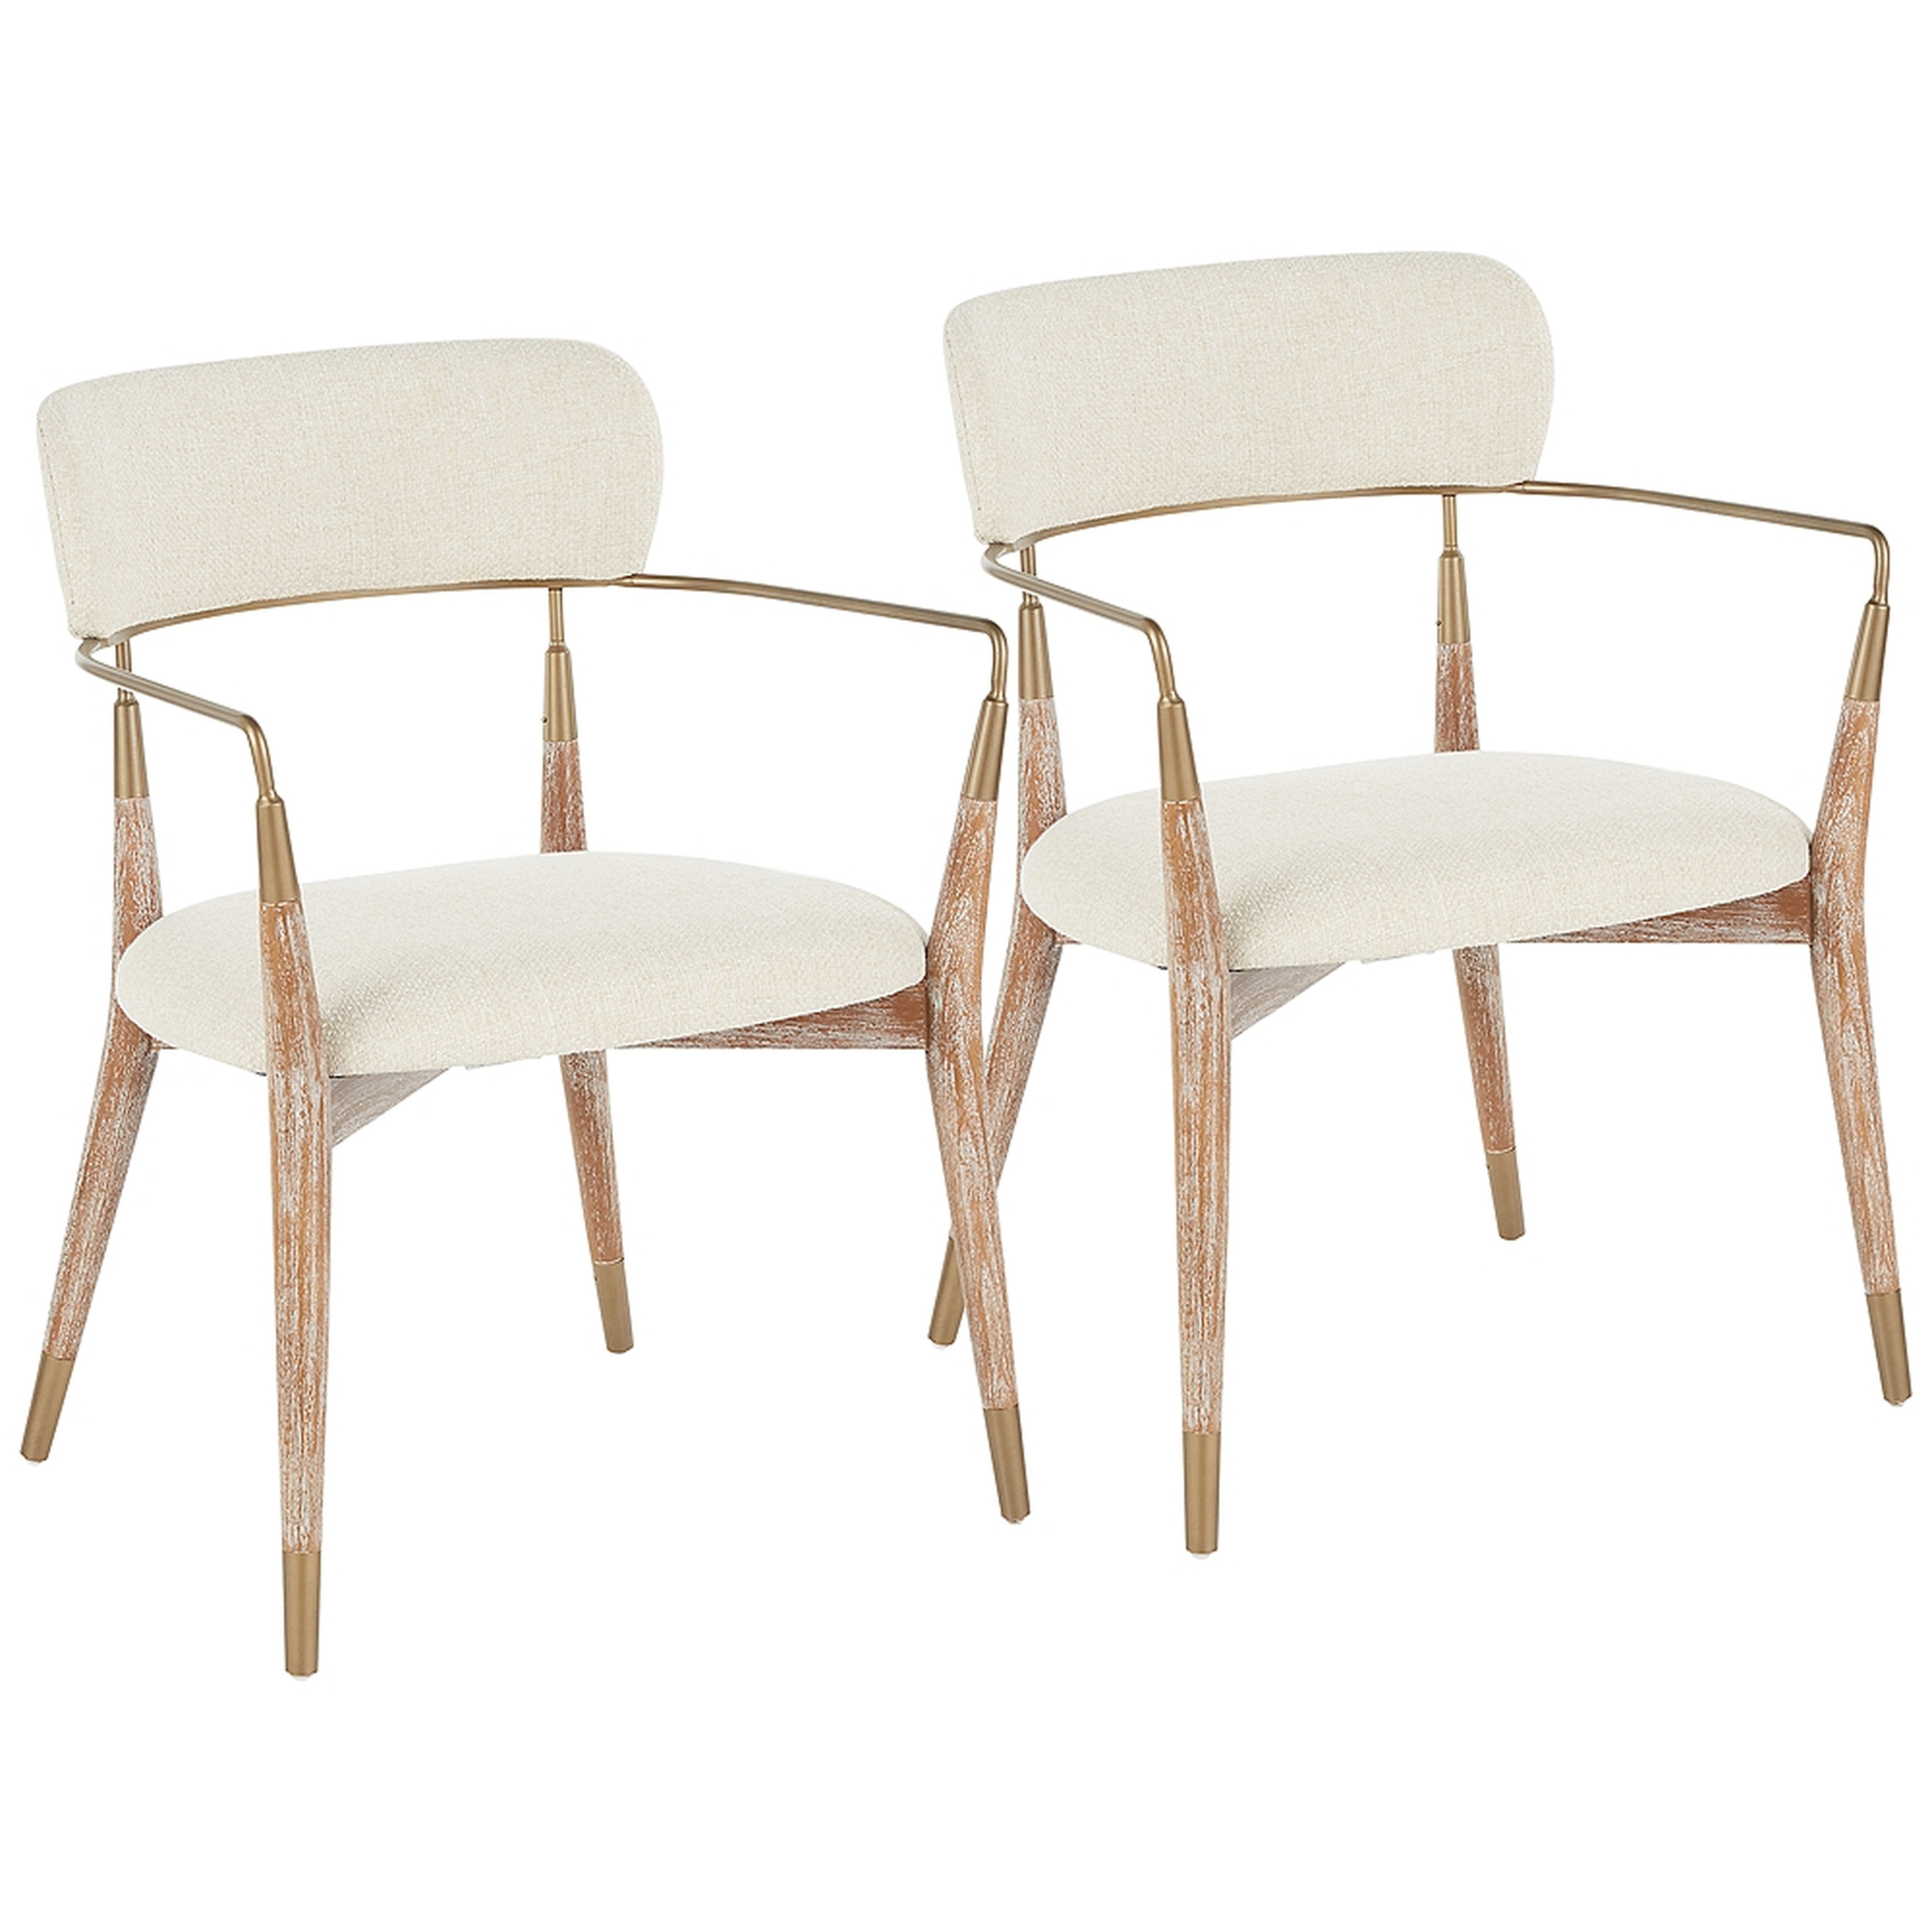 Savannah Wood Dining Chairs, White Washed, Set of 2 - Lamps Plus